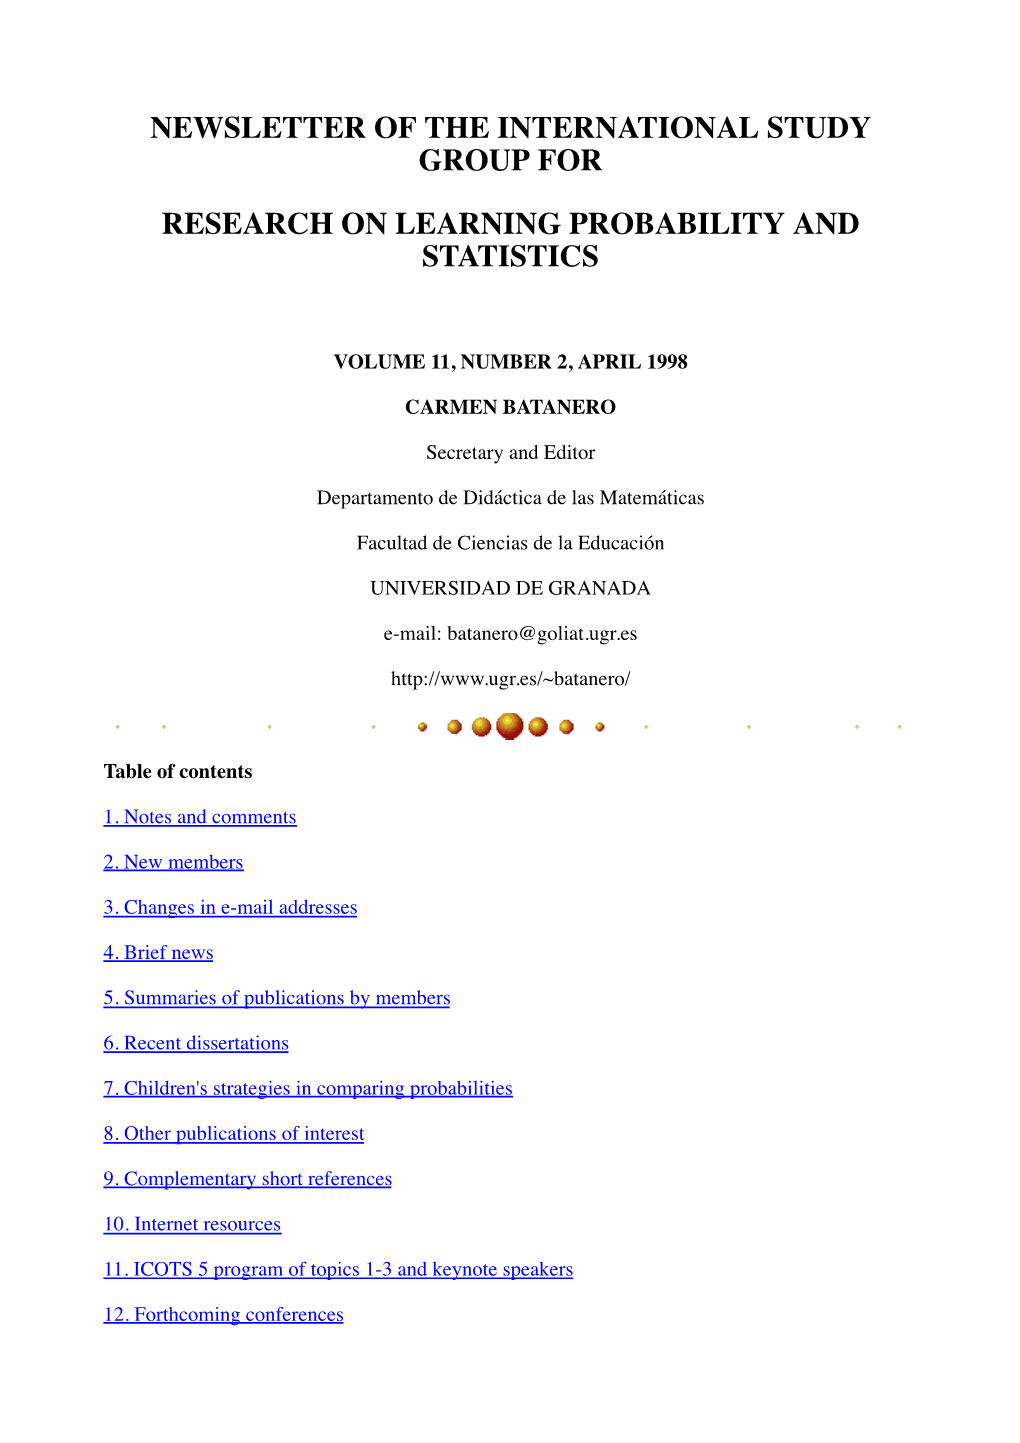 Newsletter of the International Study Group for Research on Learning Probability and Statistics